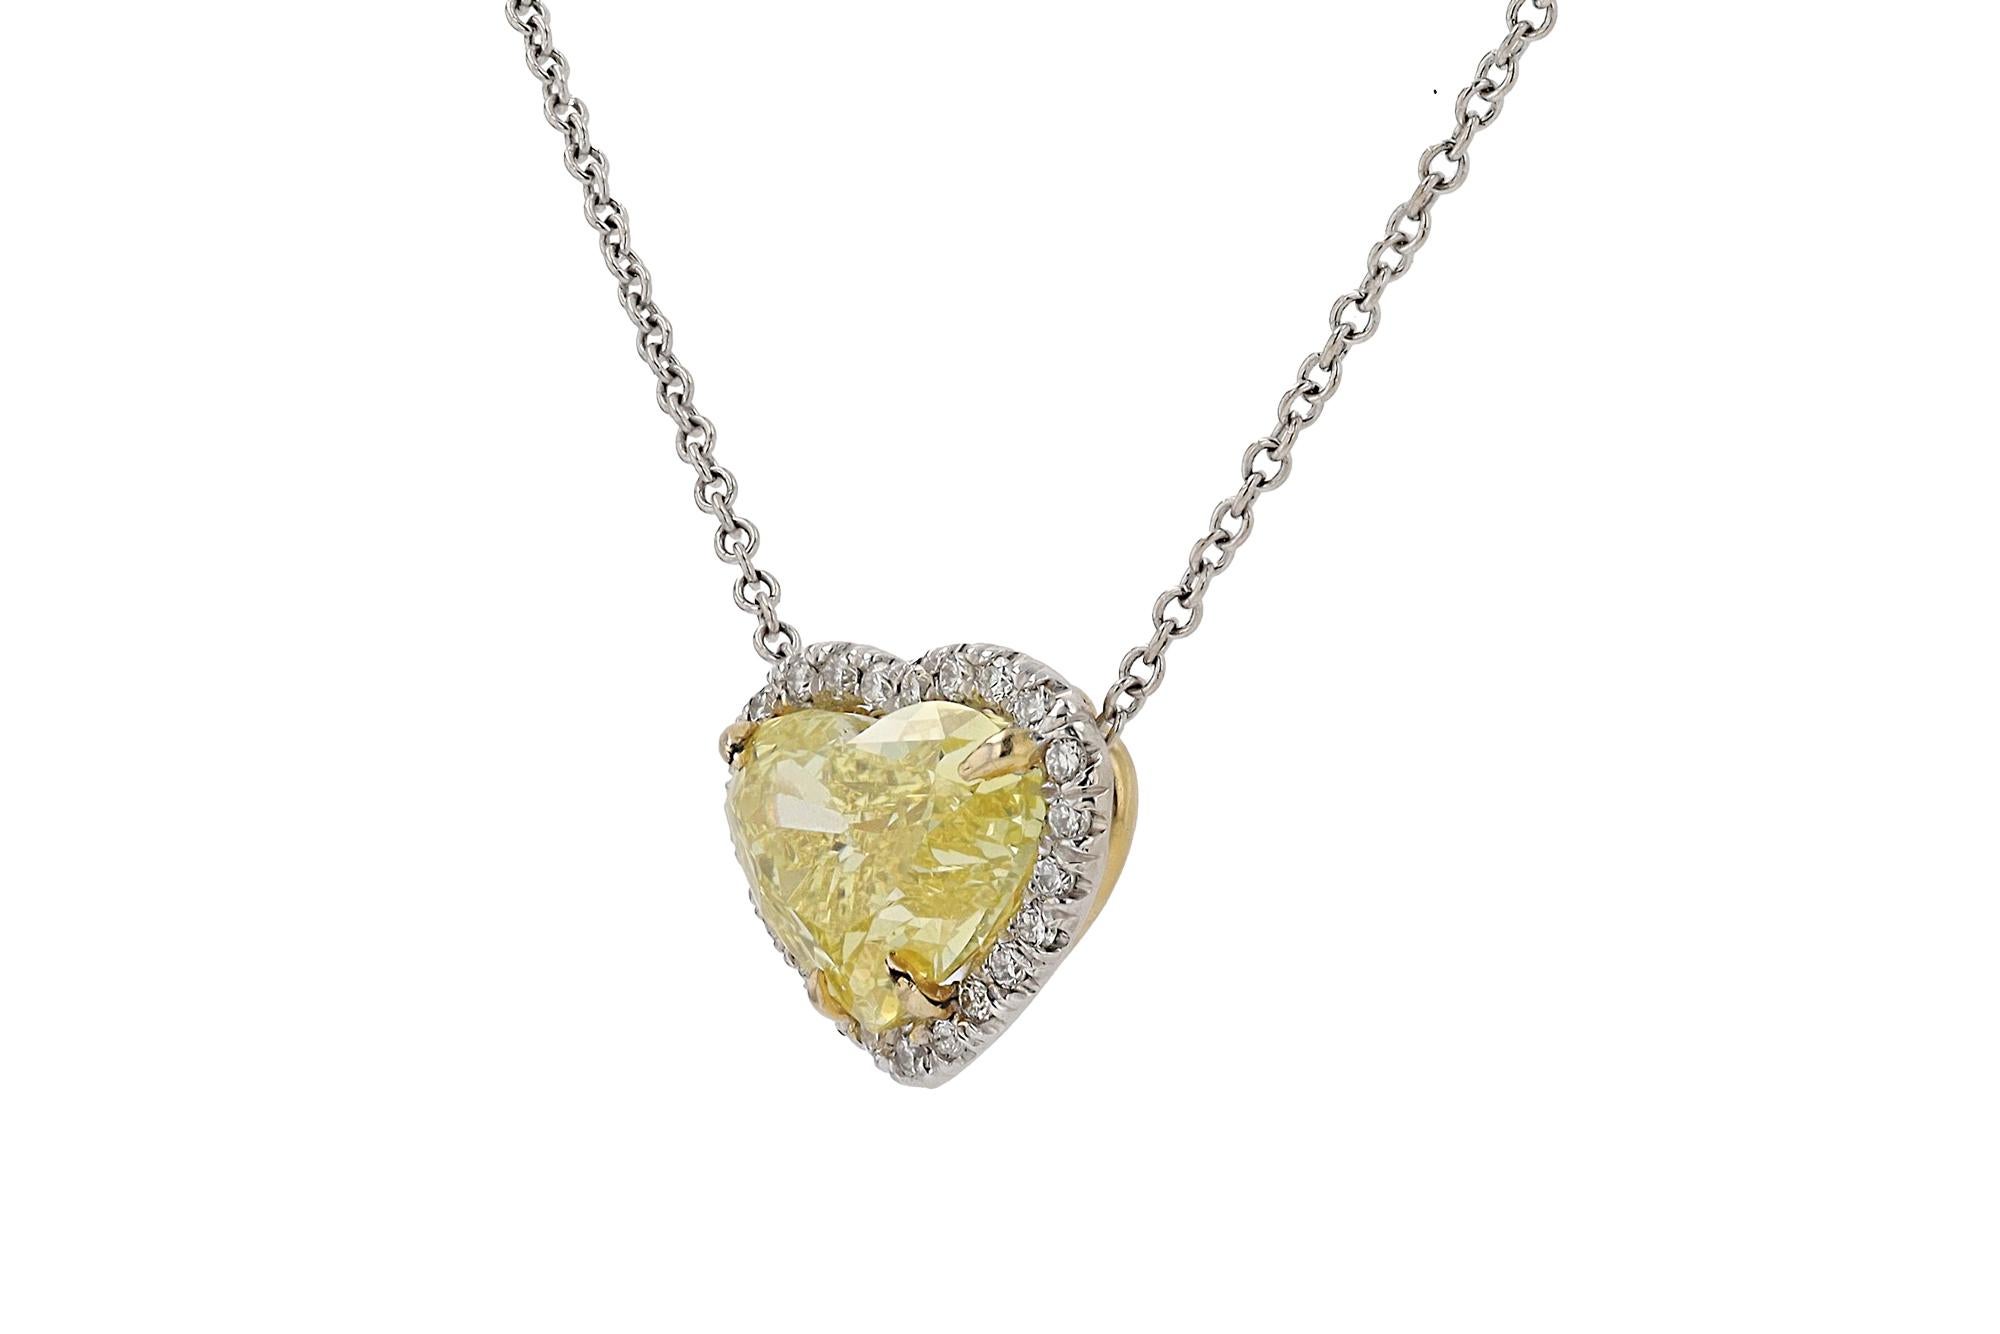 Heart Cut Bella Rosa Jewelers GIA Certified 2 Carat Vivid Yellow Diamond Heart Necklace For Sale